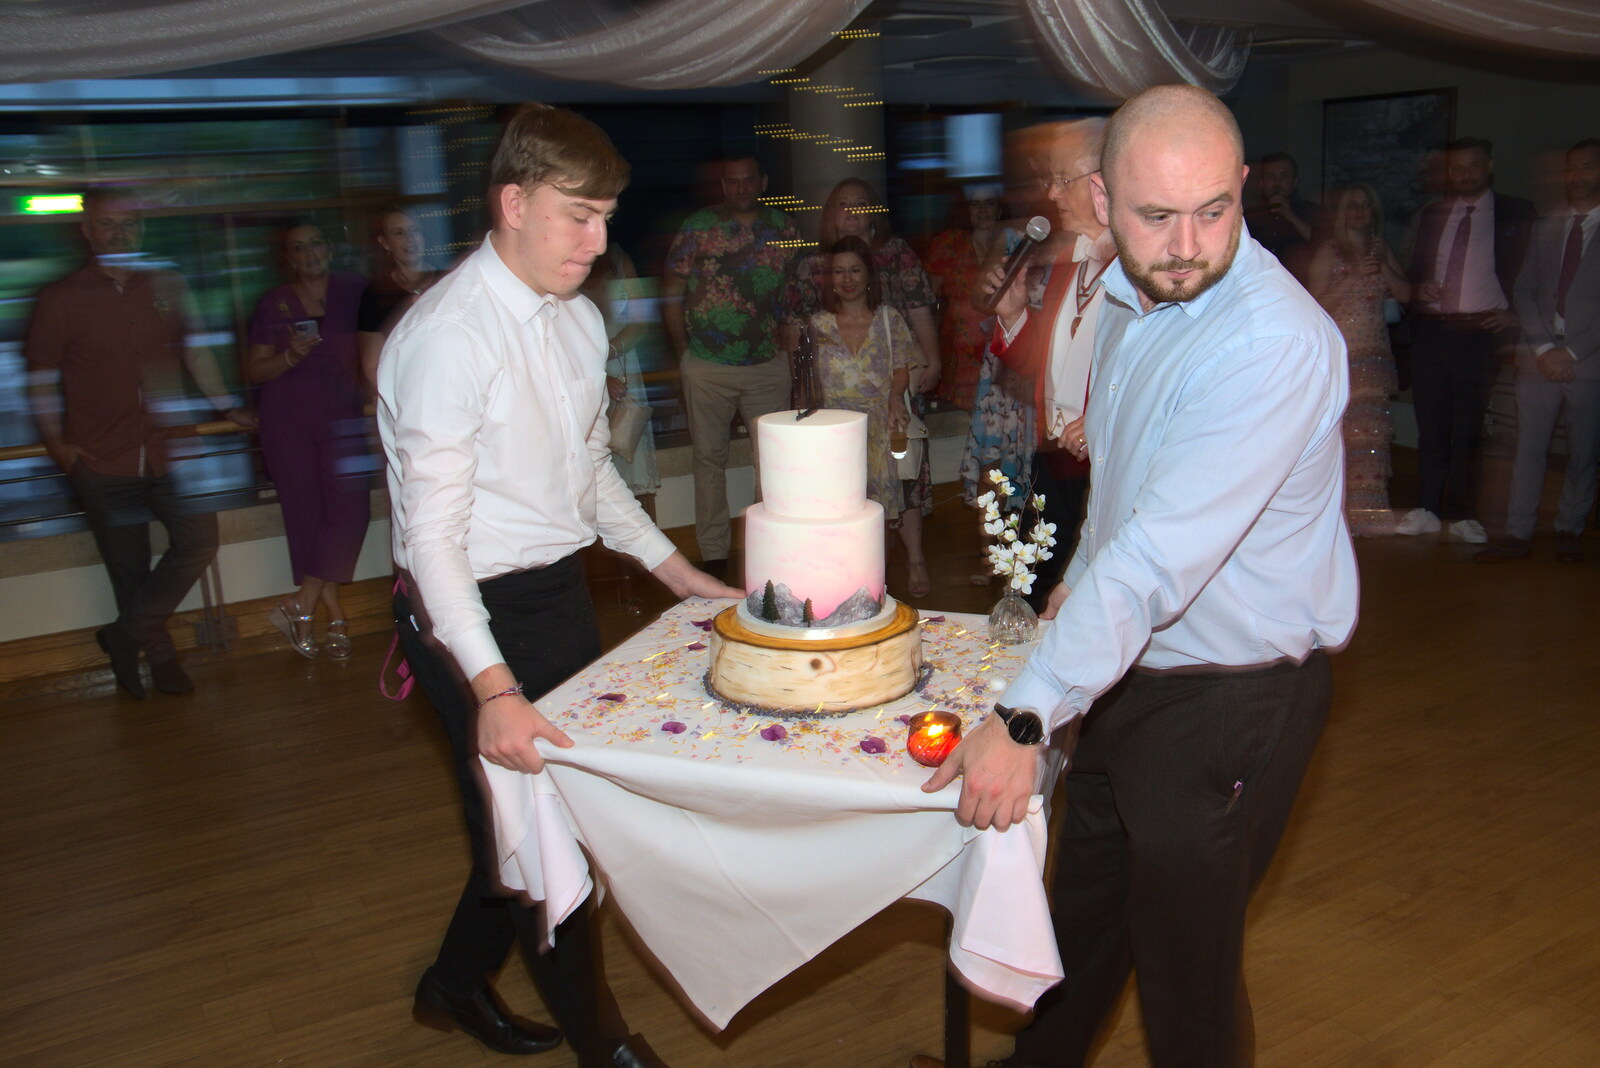 The cake is hauled off from Petay's Wedding Reception, Fanhams Hall, Ware, Hertfordshire - 20th August 2021